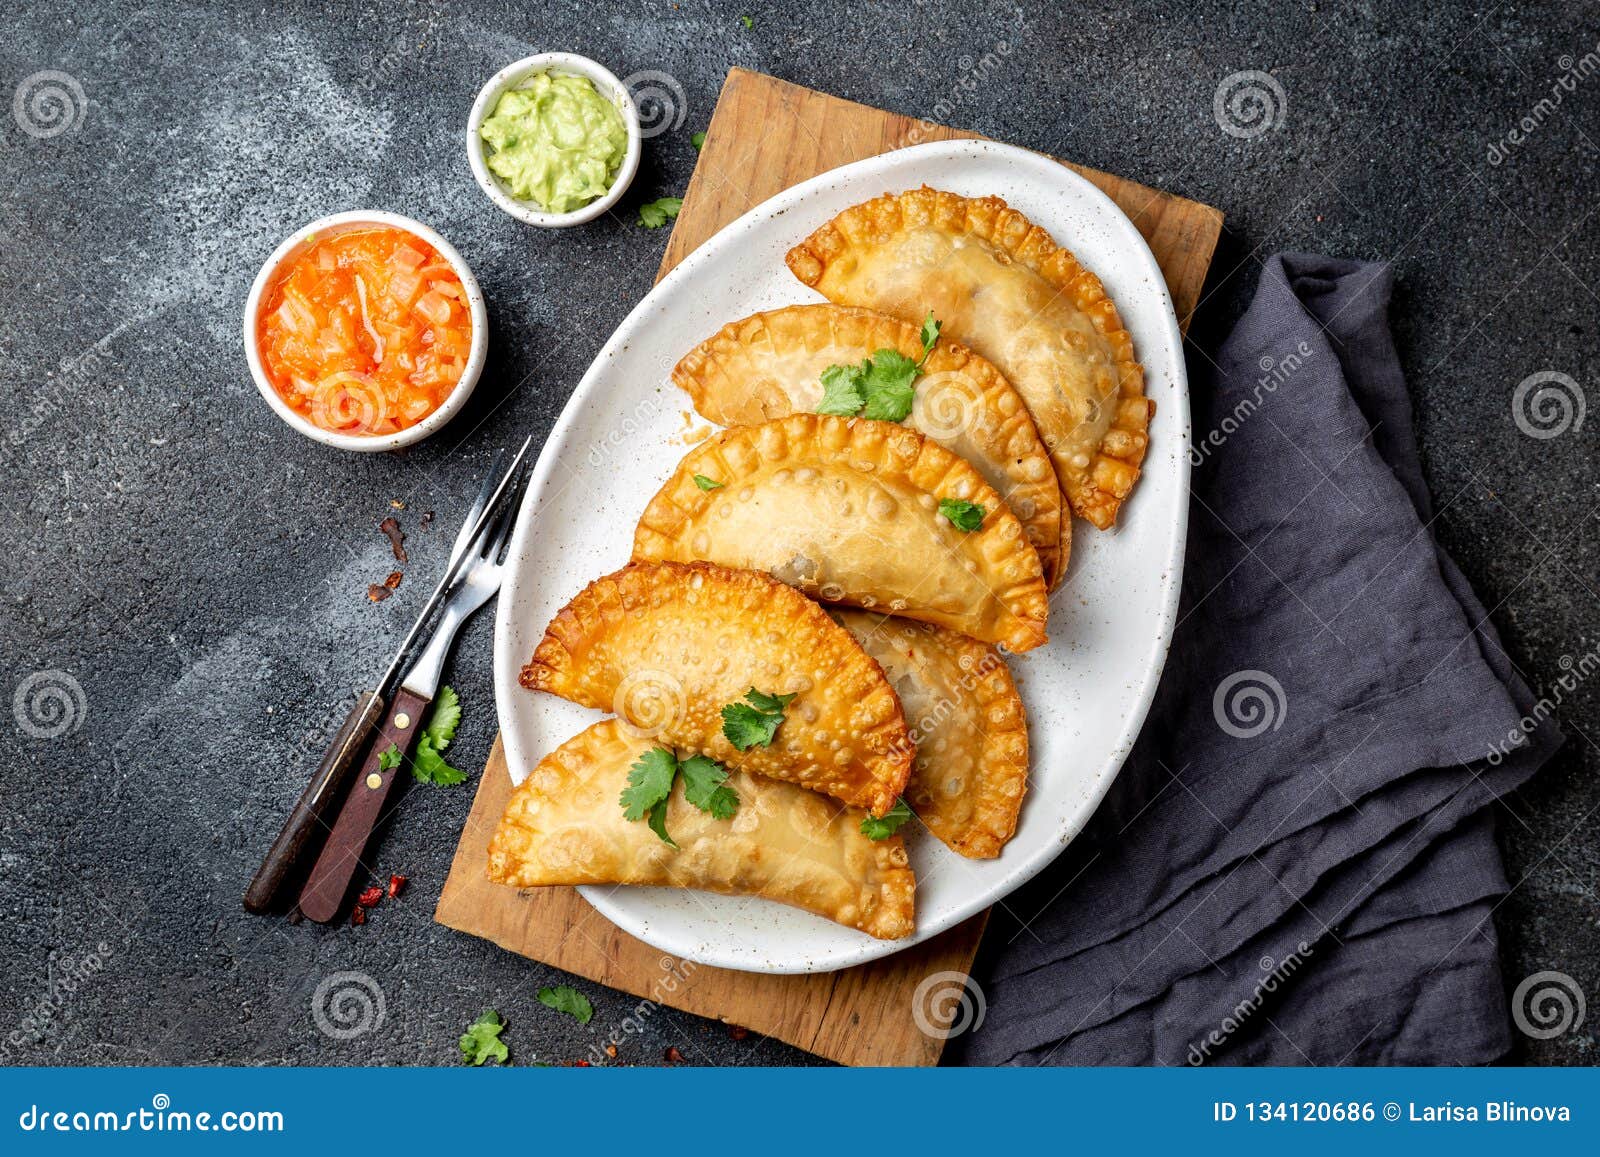 latin american fried empanadas with tomato and avocado sauces. top view